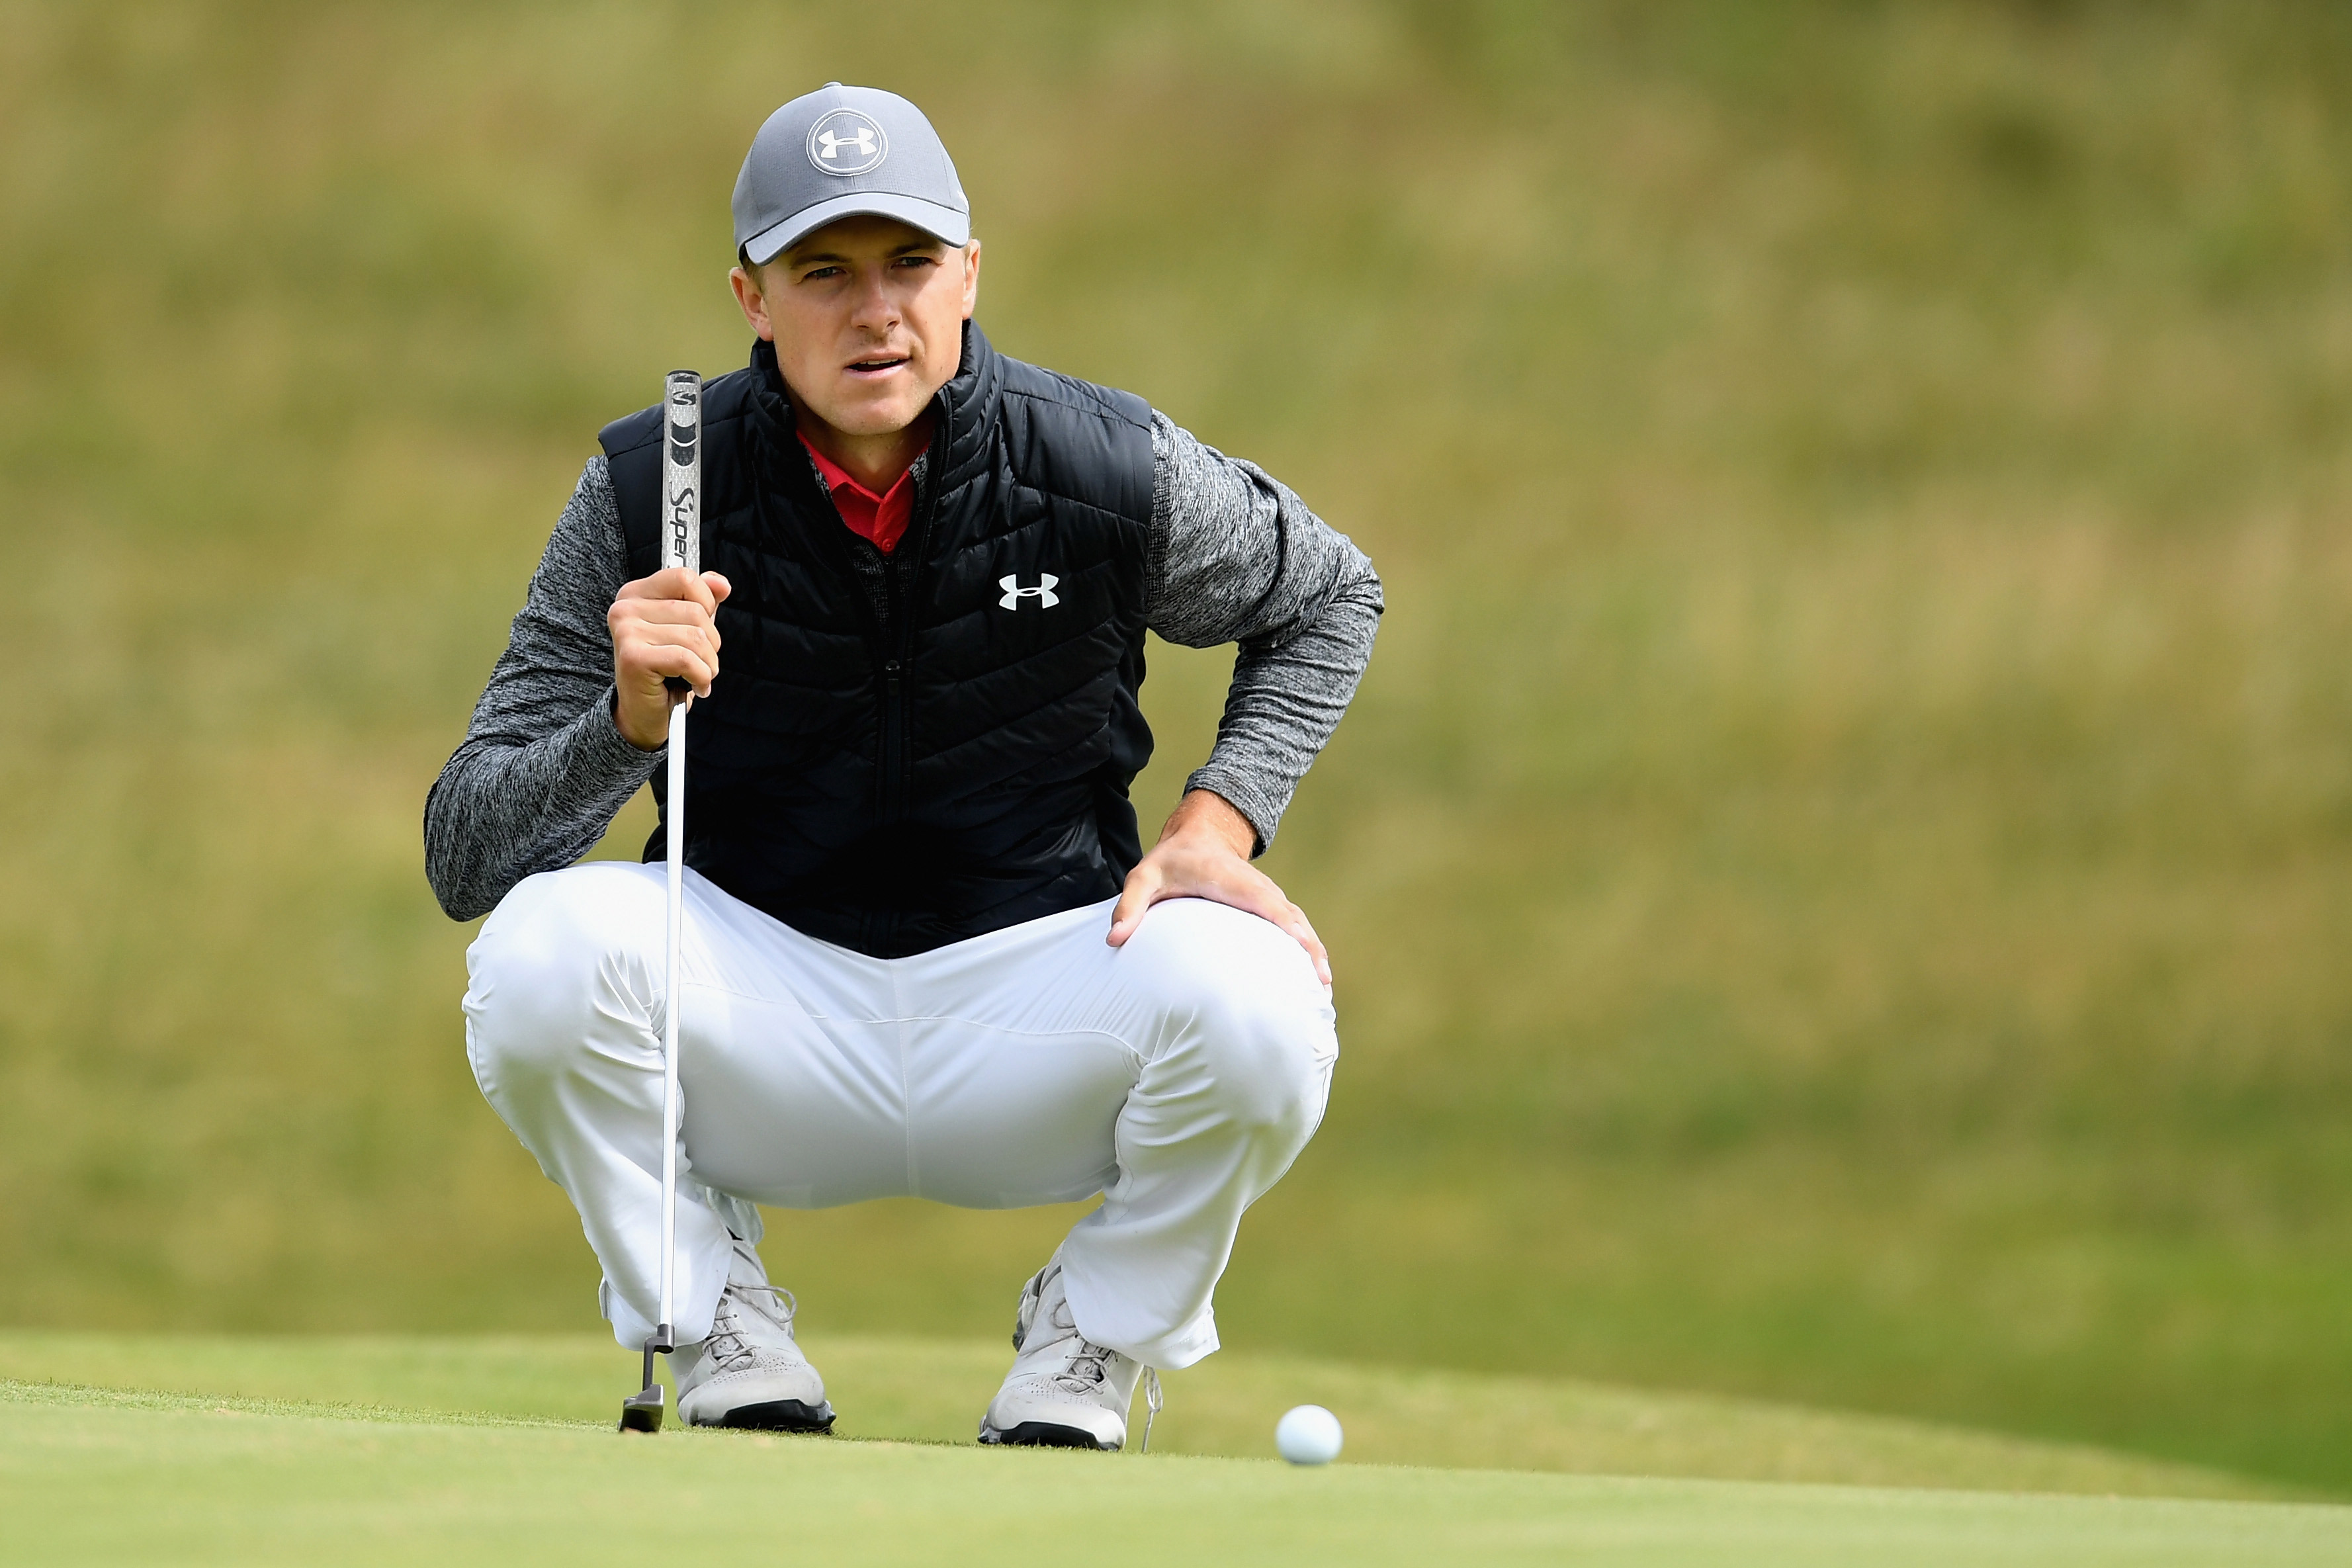 Jordan Spieth proves he can putt and 